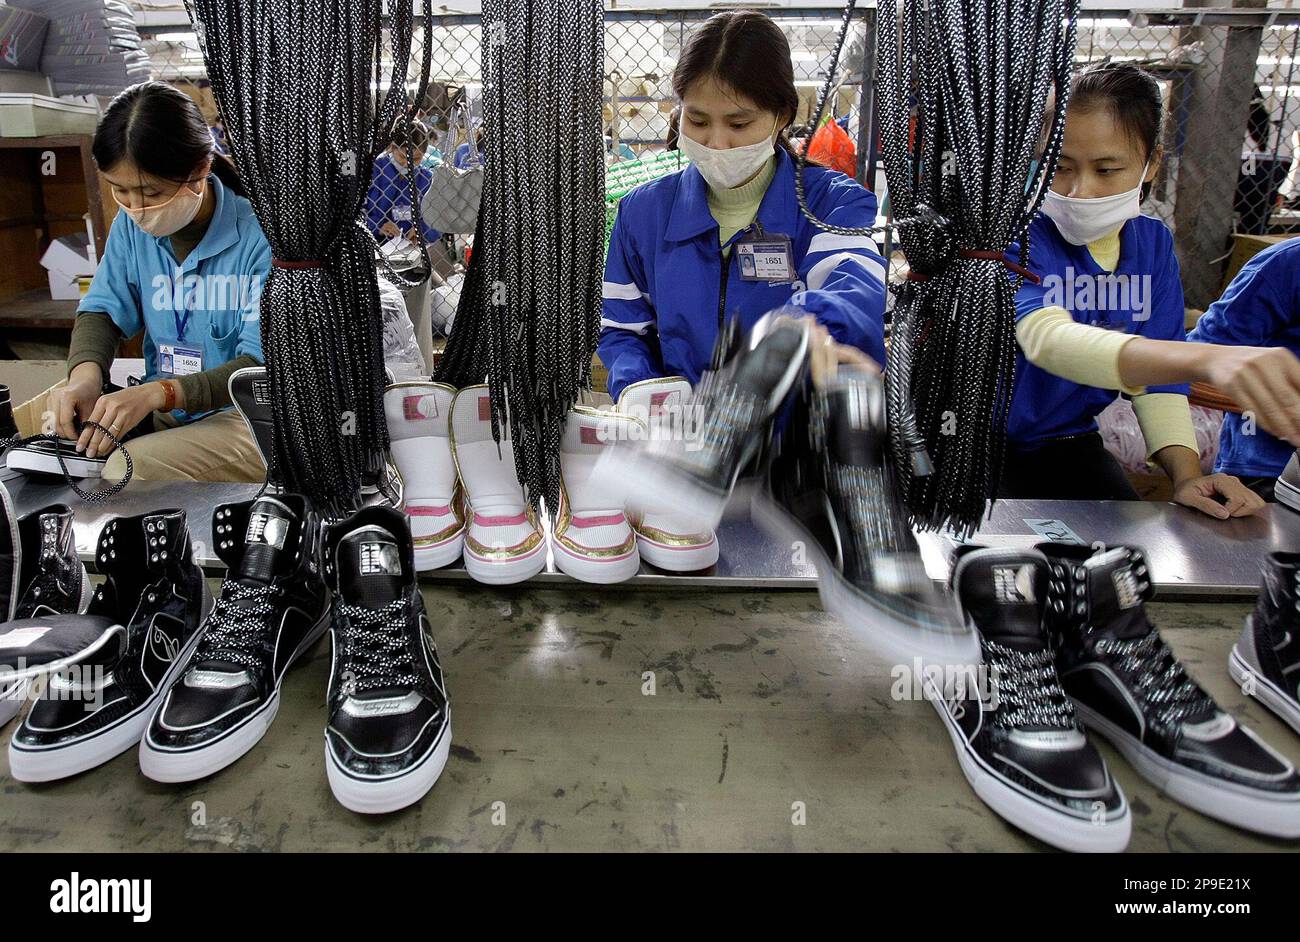 Workers work on assembly line of shoes at Thuong Dinh Shoe factory in  Hanoi, Vietnam, Thursday, Nov. 20, 2008. Thuong Dinh Shoe factory produces  shoes for domestic markets and for exports. The